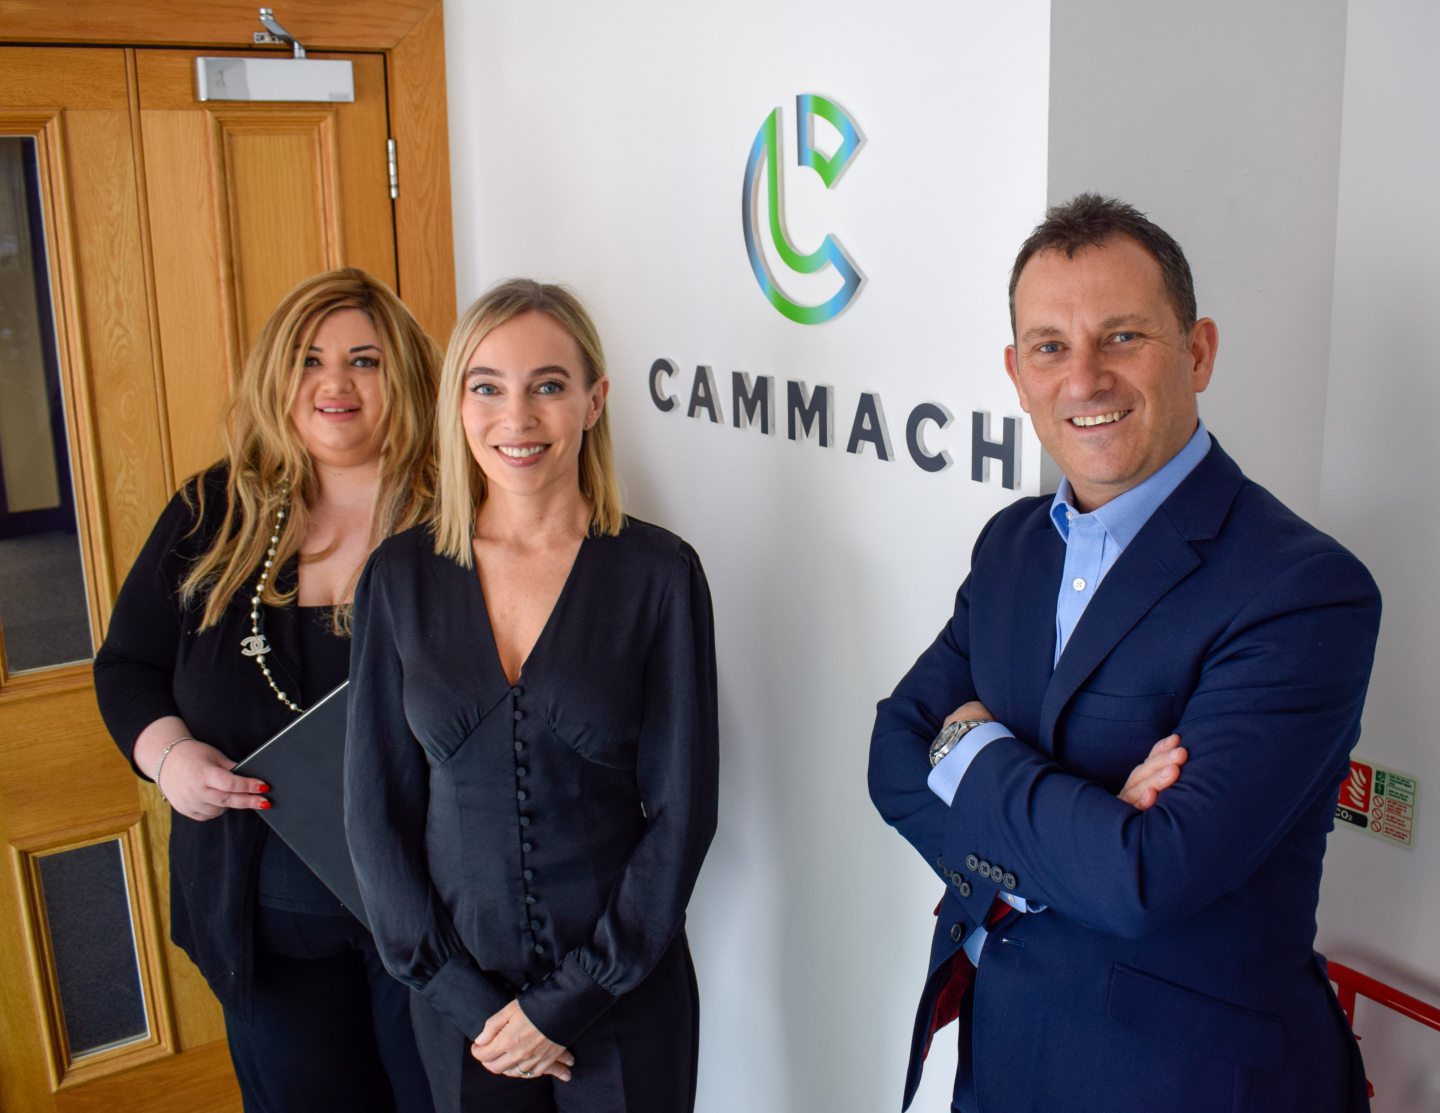 Cammach launches dedicated Drilling & Wells division as leading oil & gas recruitment agency appoints new MD